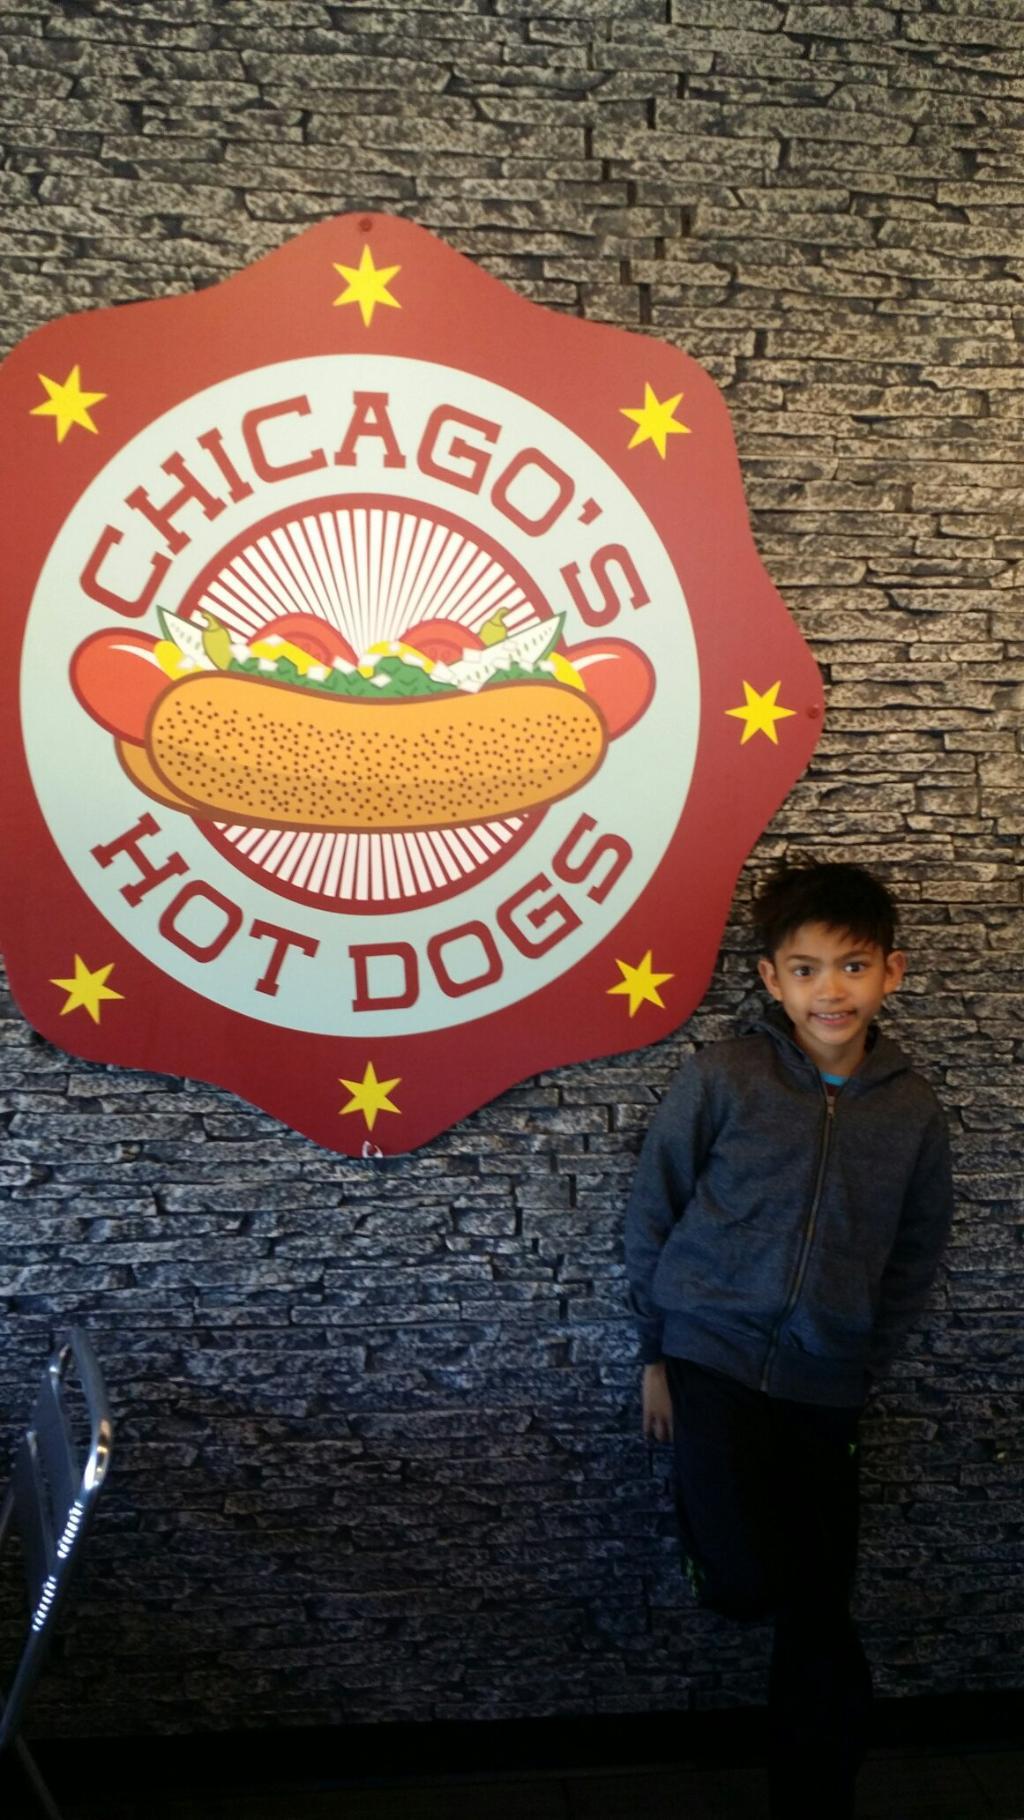 Chicago`s Hot Dogs